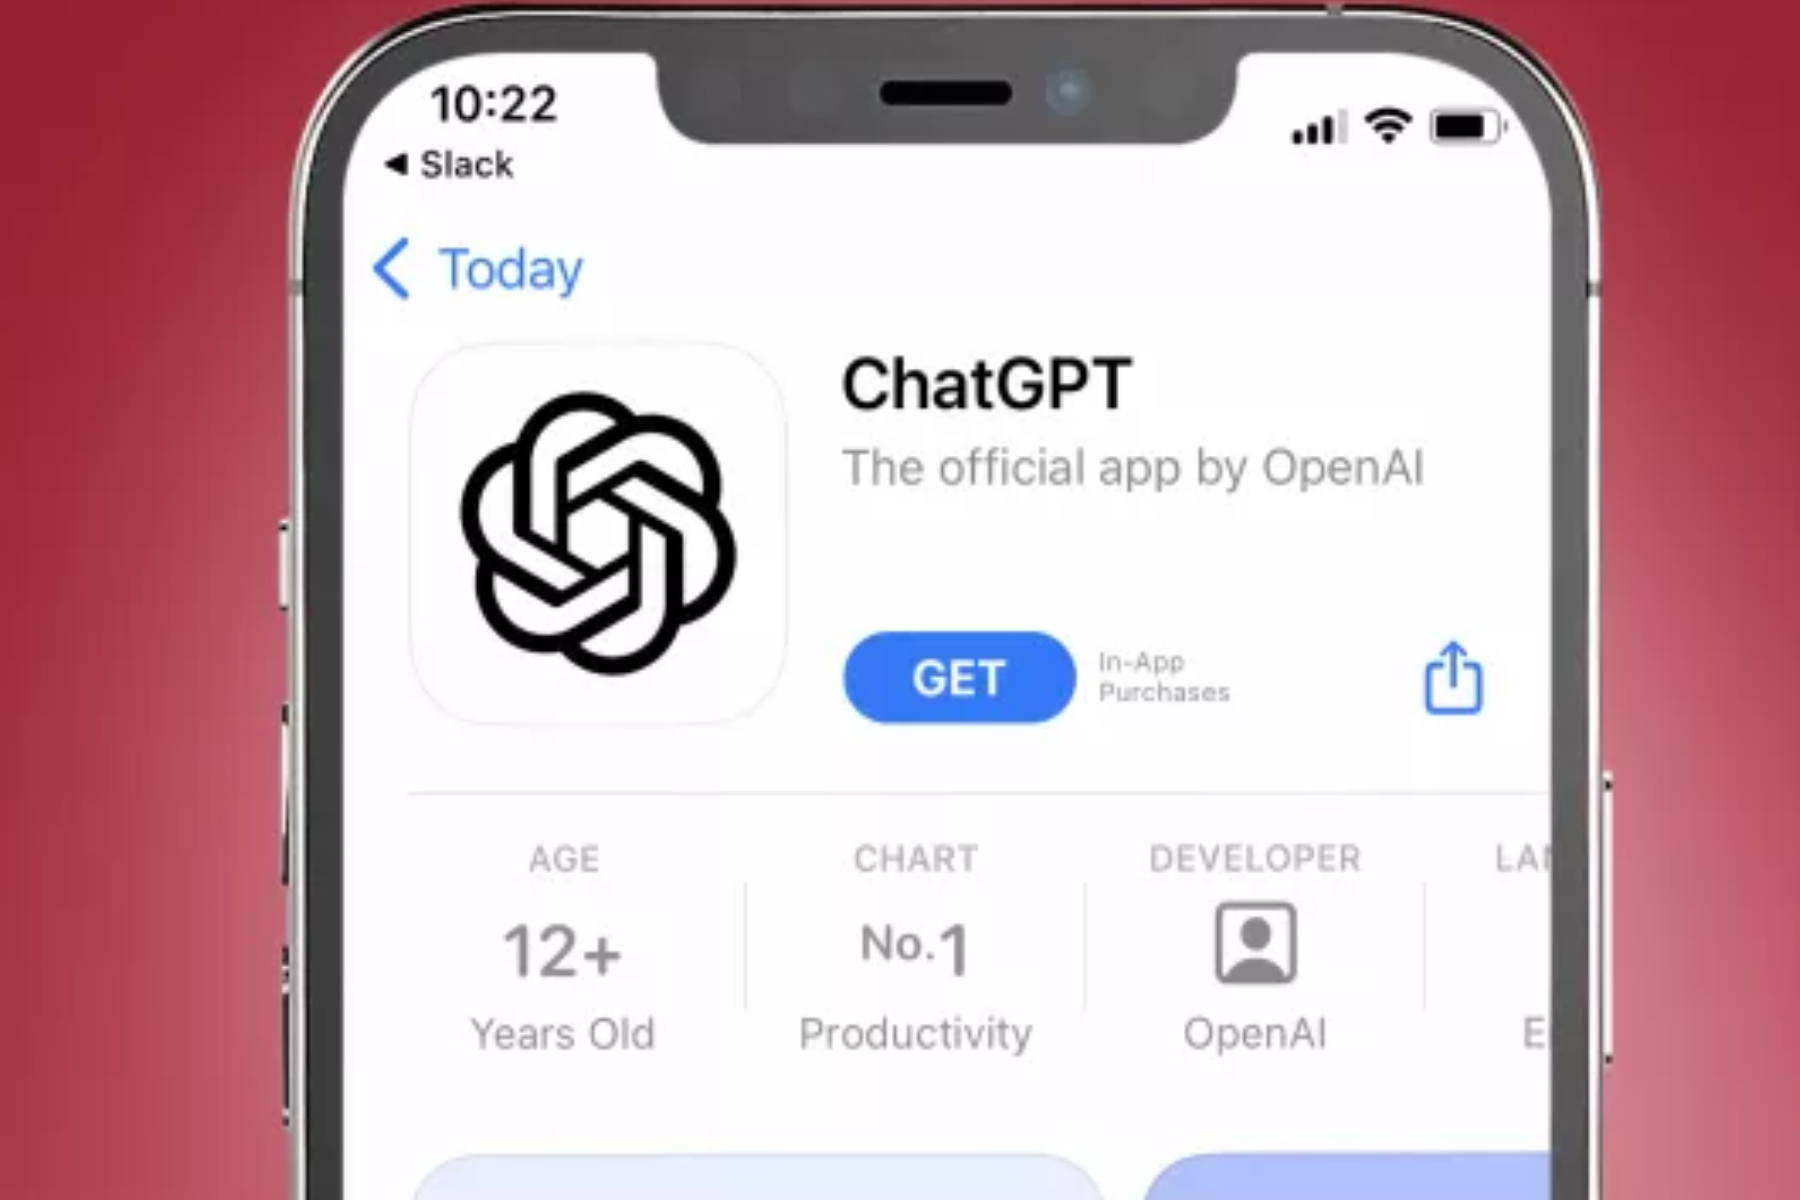 ChatGPT app downloads have slowed, indicating a decrease in overall public interest